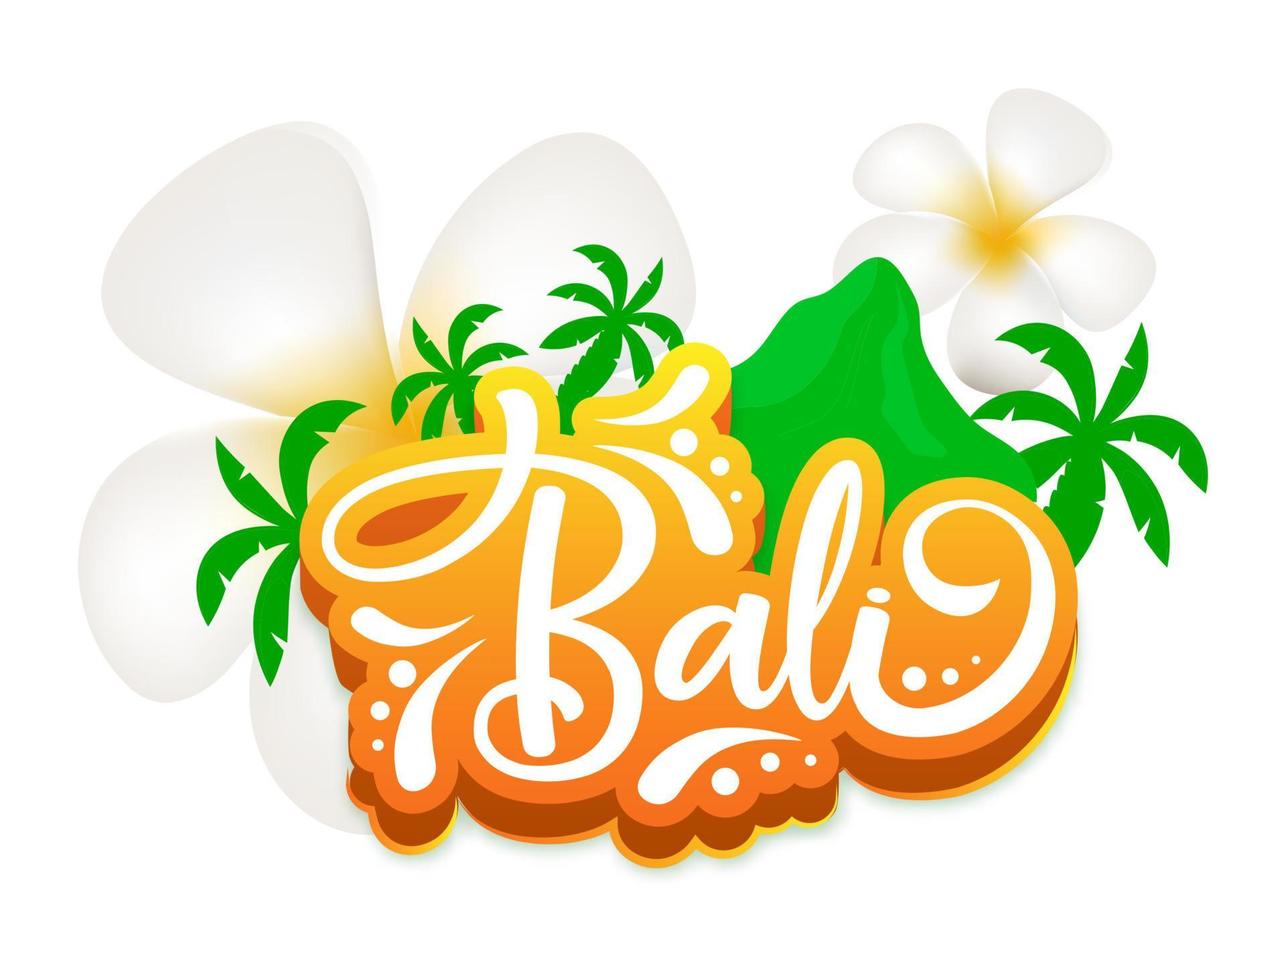 Bali flat poster vector template. Indonesian exotic island. Flowers and mountain. Asian culture. Banner, brochure page, leaflet design layout. Sticker with calligraphic lettering and plumeria